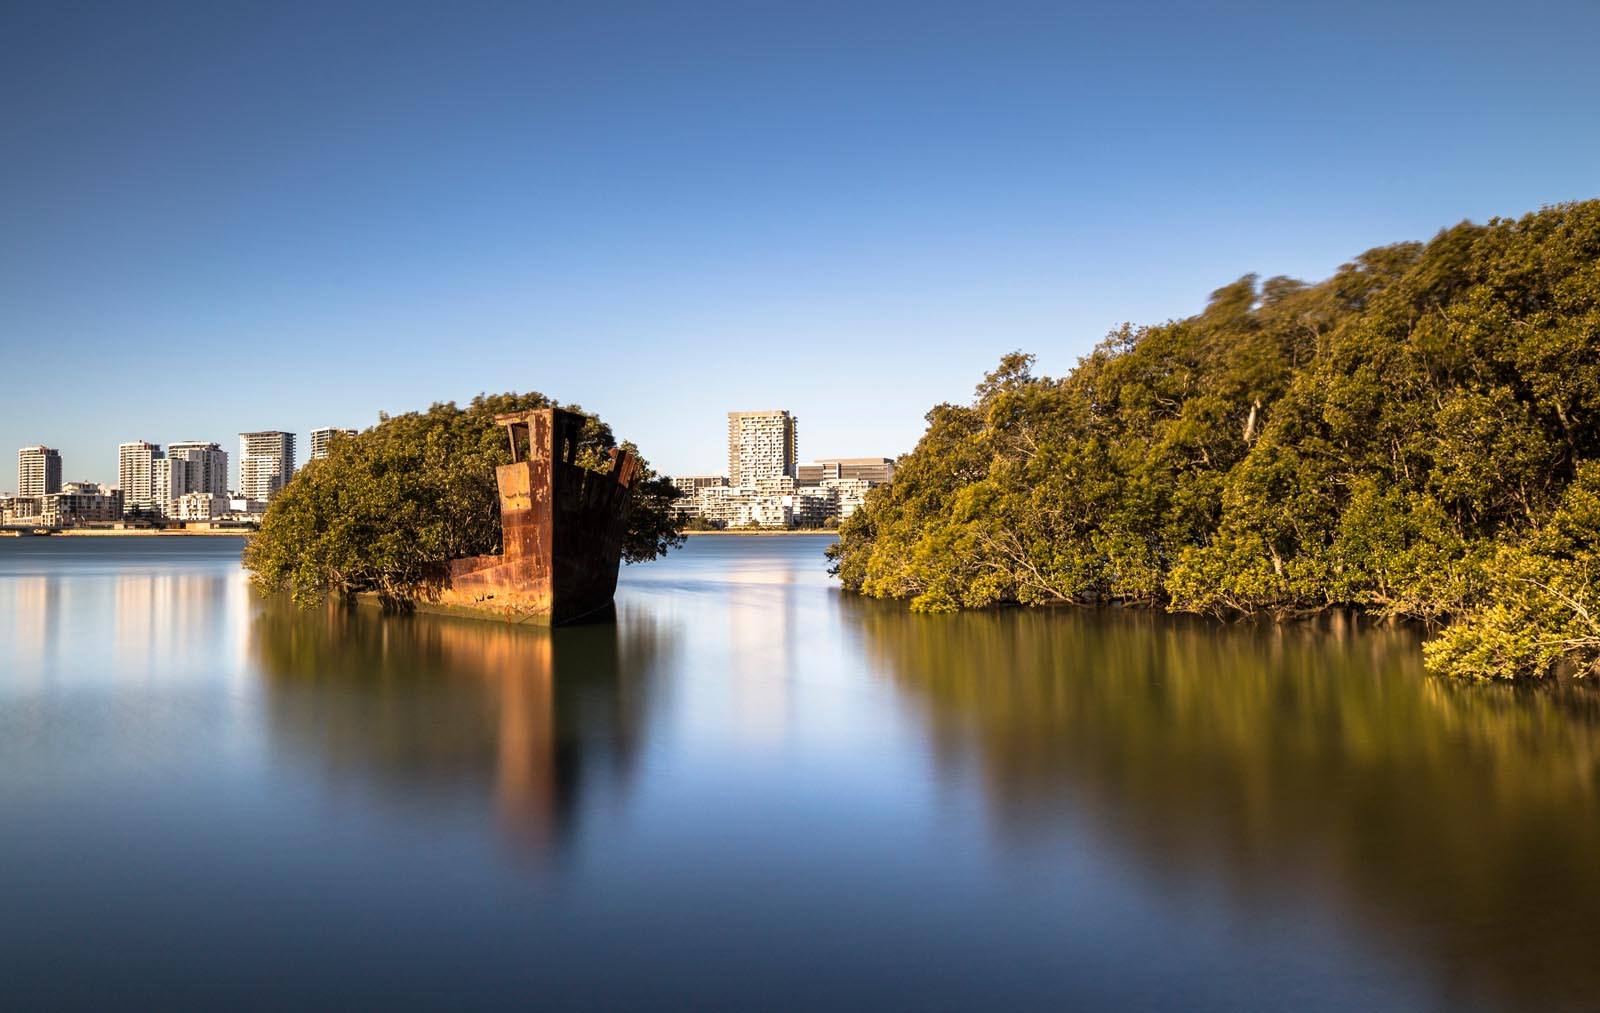 One of the best Sydney walks takes you to Ayrfield Shipwreck on the Parramatta River